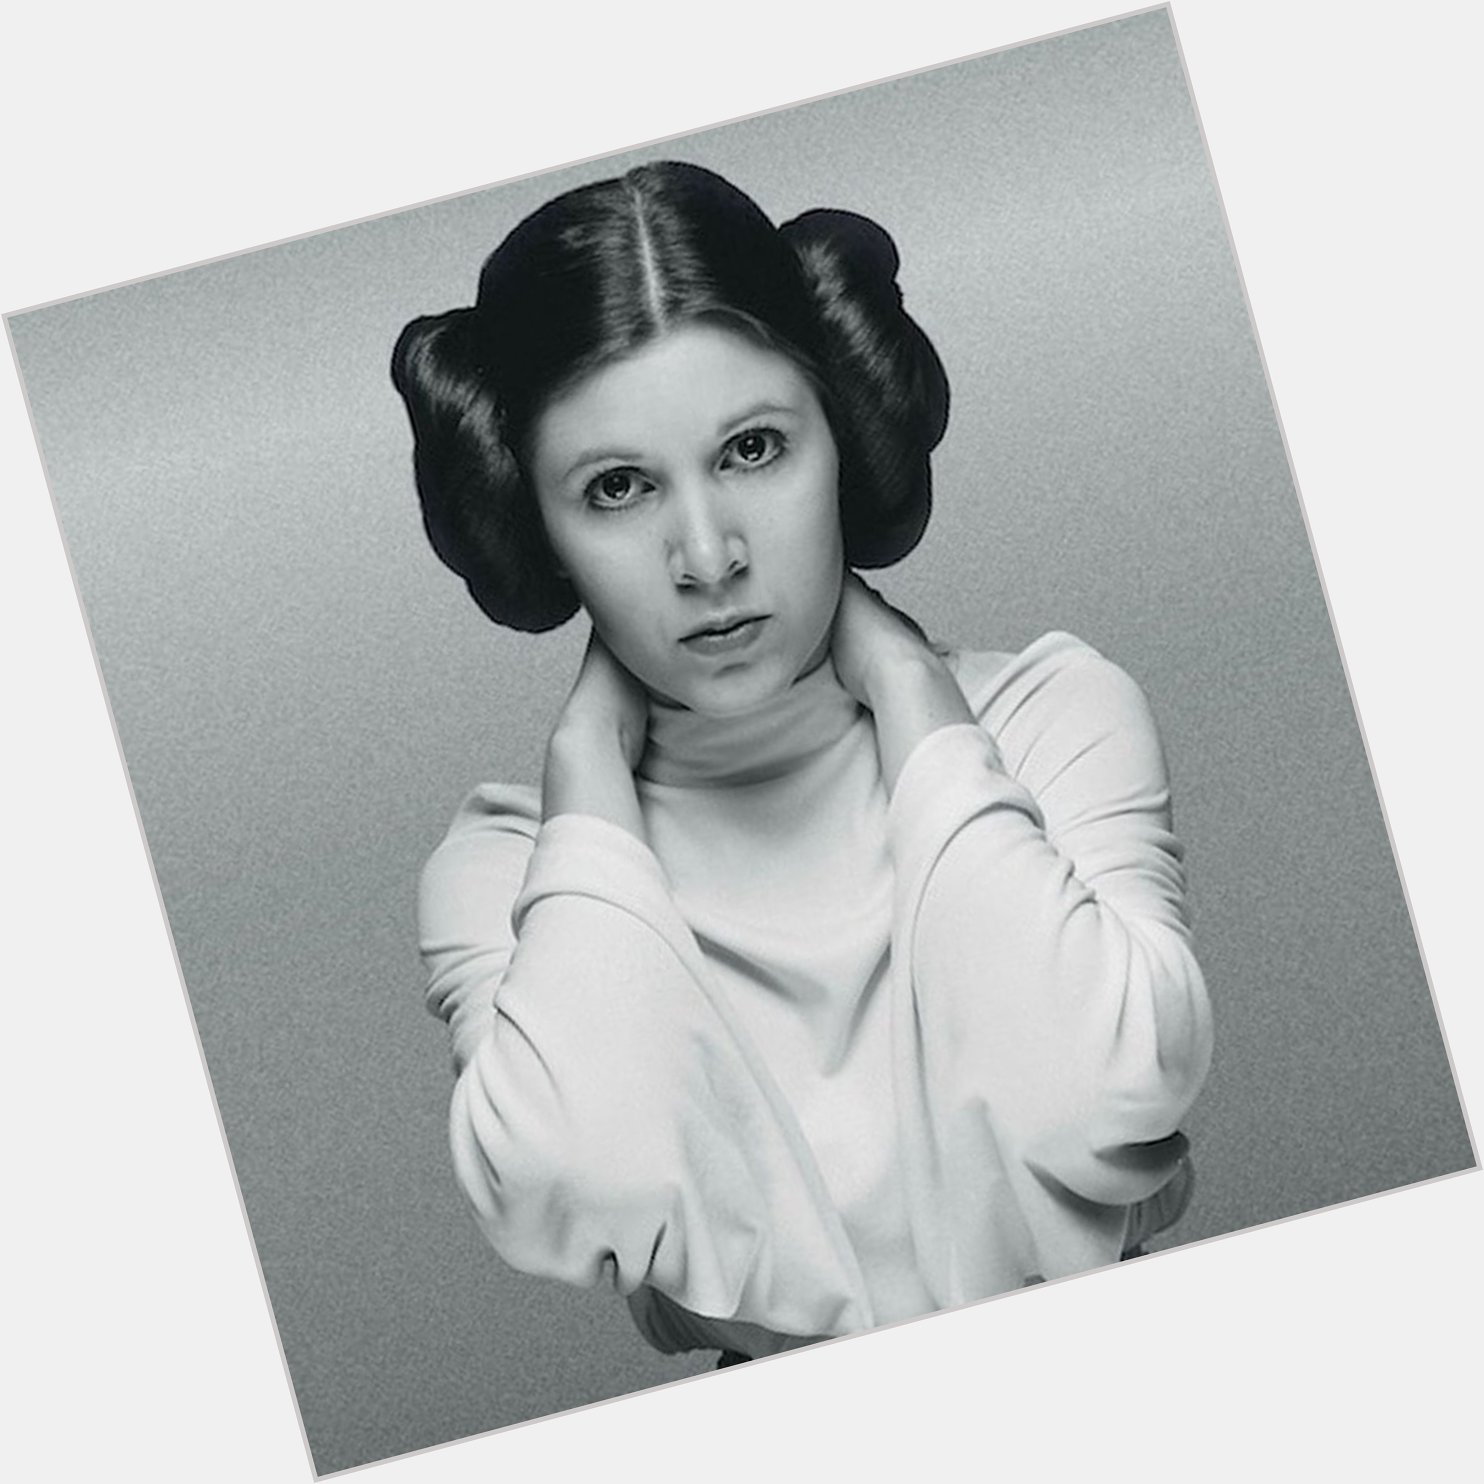 Happy birthday Your Highness..
Remembering the late Actress, Carrie Fisher (21 October 1956 27 December 2016) 